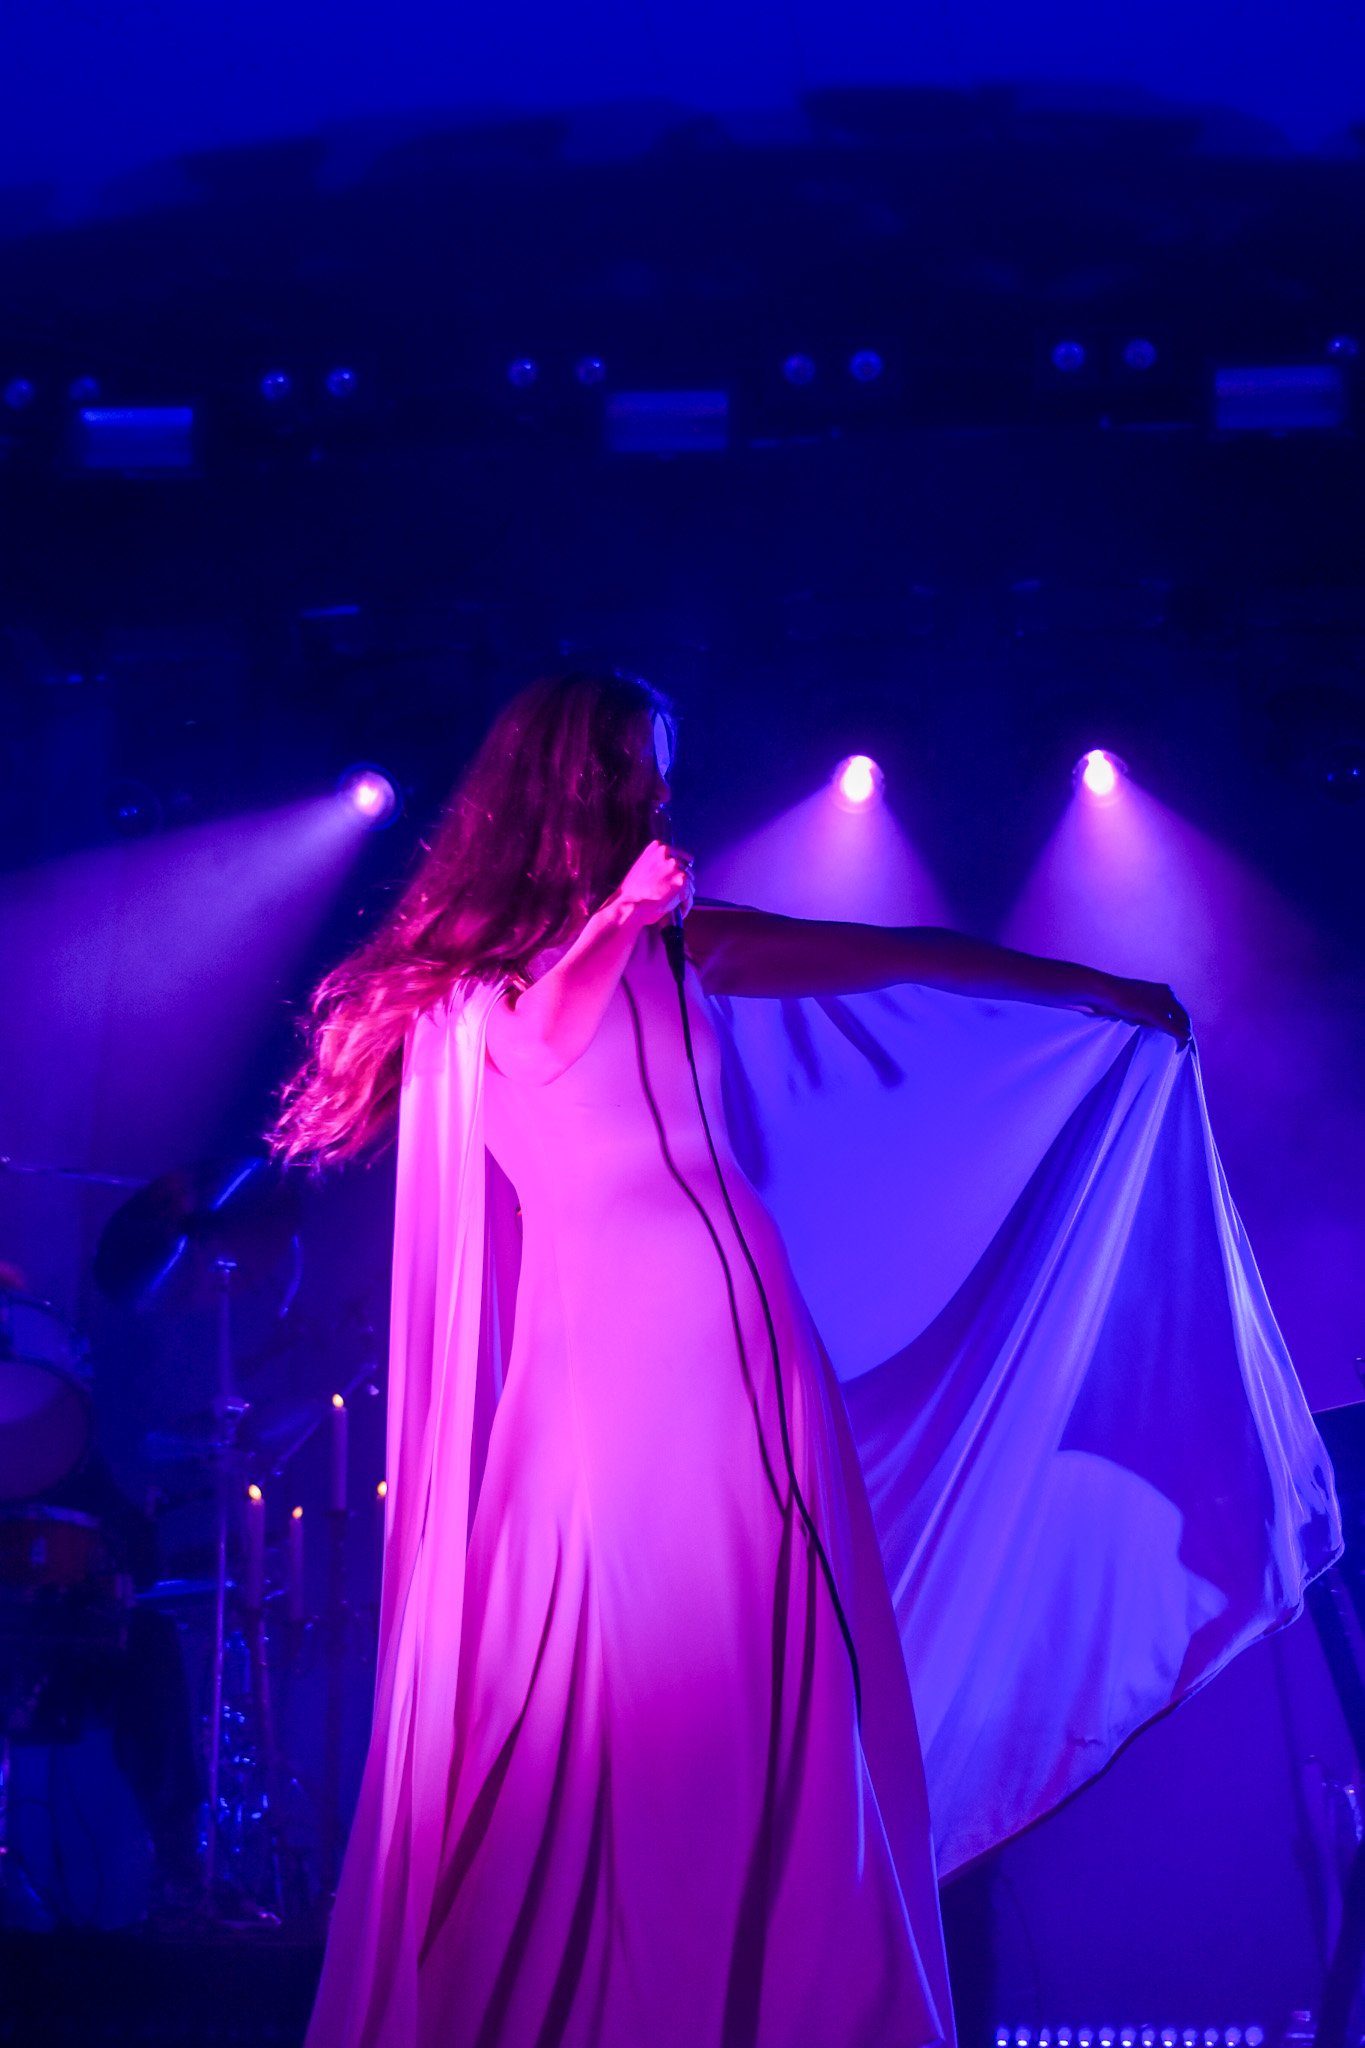  As Weyes Blood performs “Twin Flame,” she waves her cloak gracefully, revealing a glowing heart beneath her dress. 